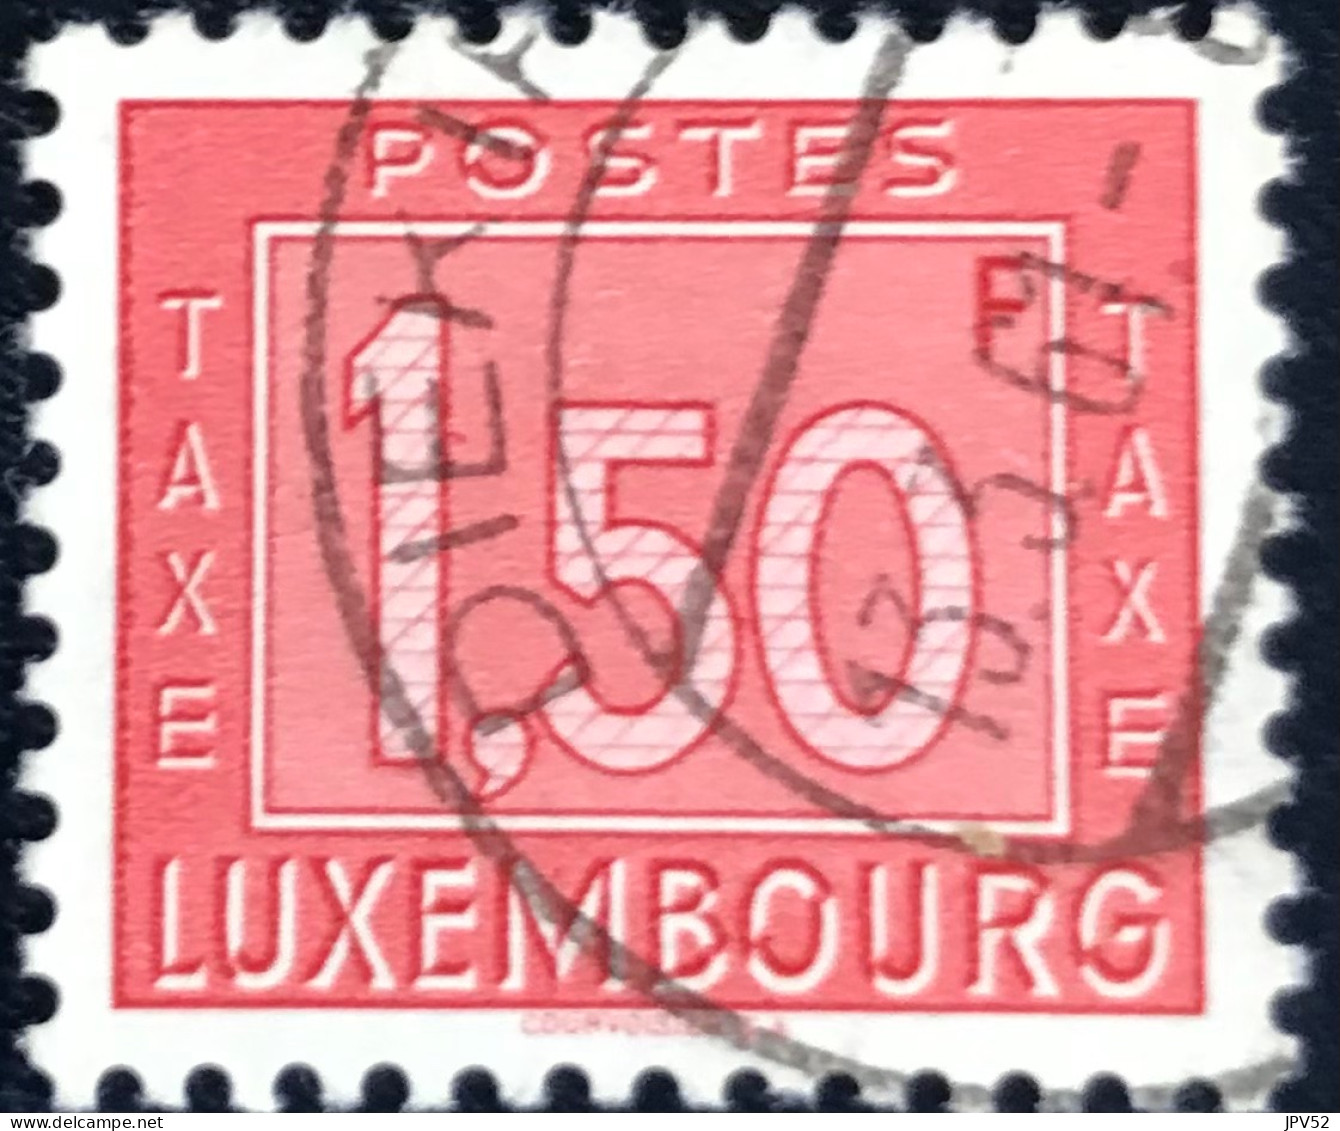 Luxembourg - Luxemburg - C18/33 - 1946 - (°)used - Michel 31 - Strafport - Cijfer - Taxes